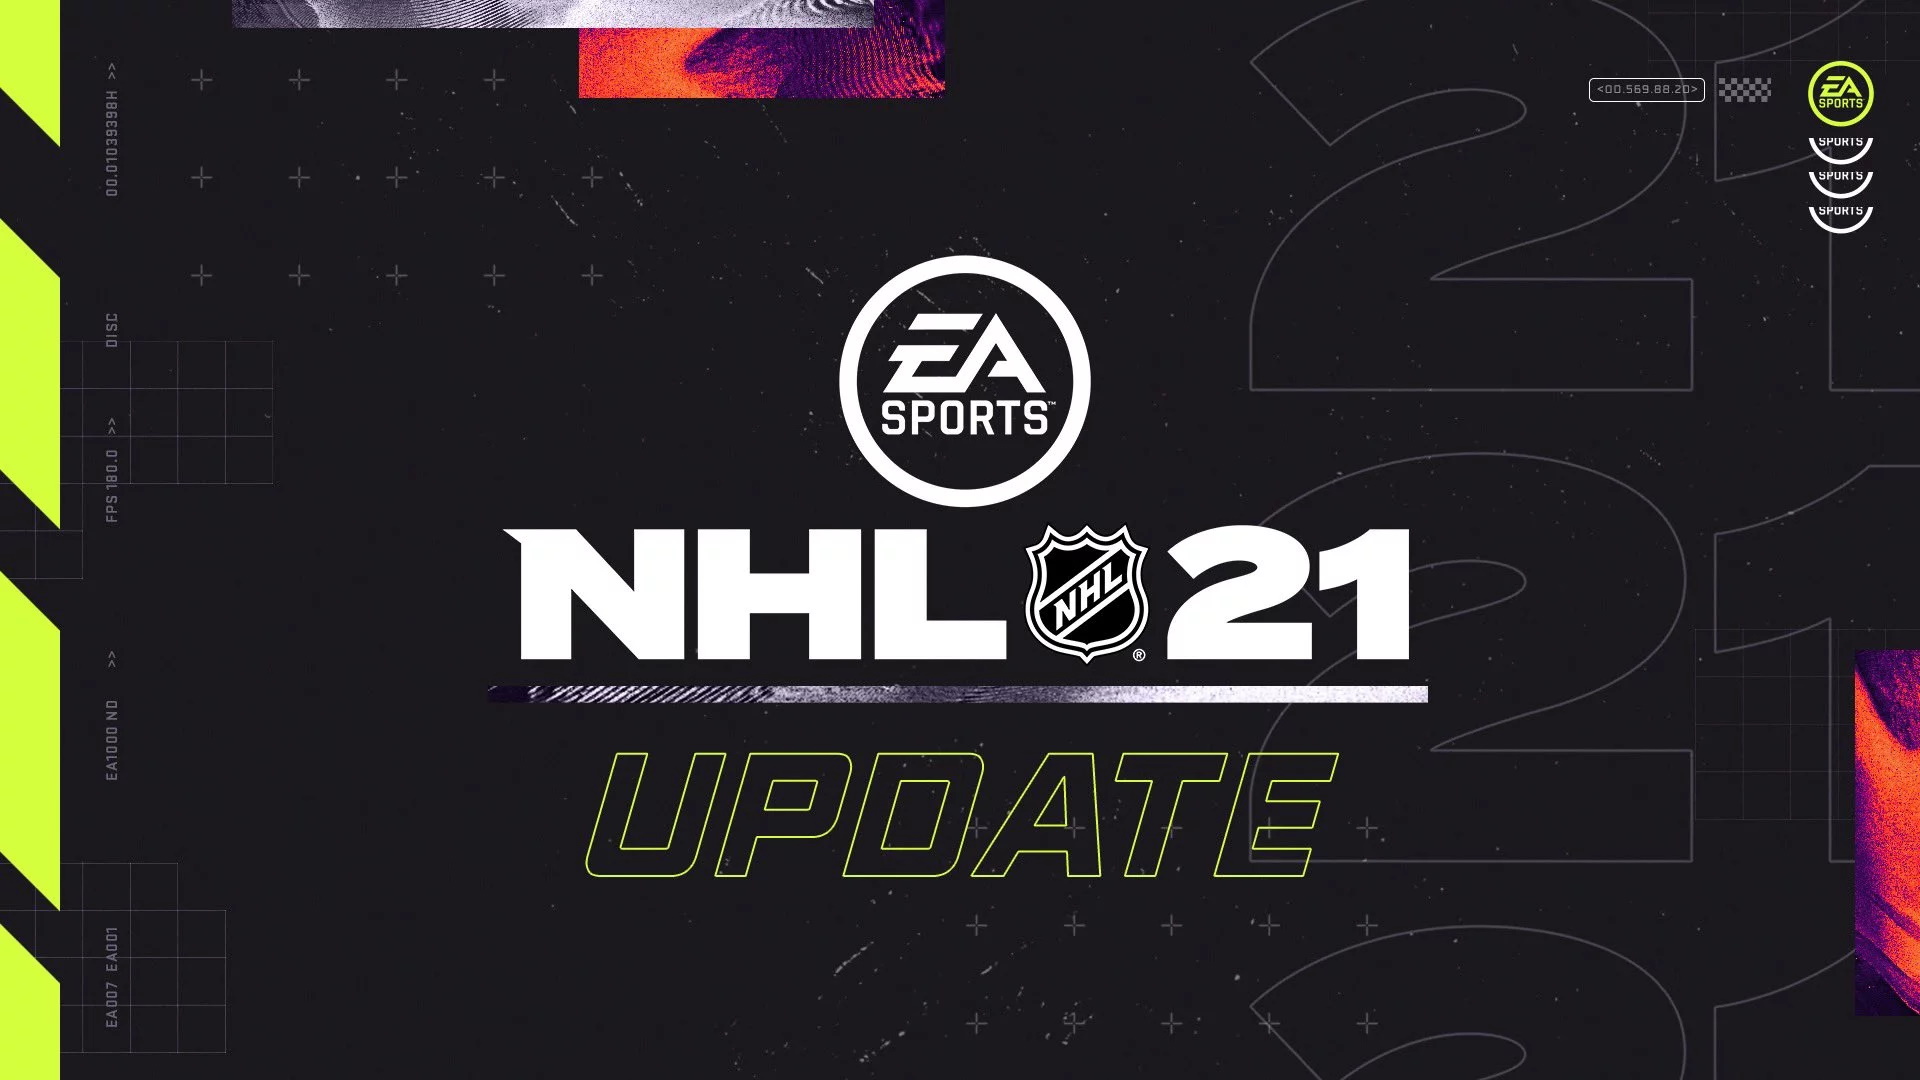 nhl-21-coming-in-october-no-next-gen-version-this-year.jpg